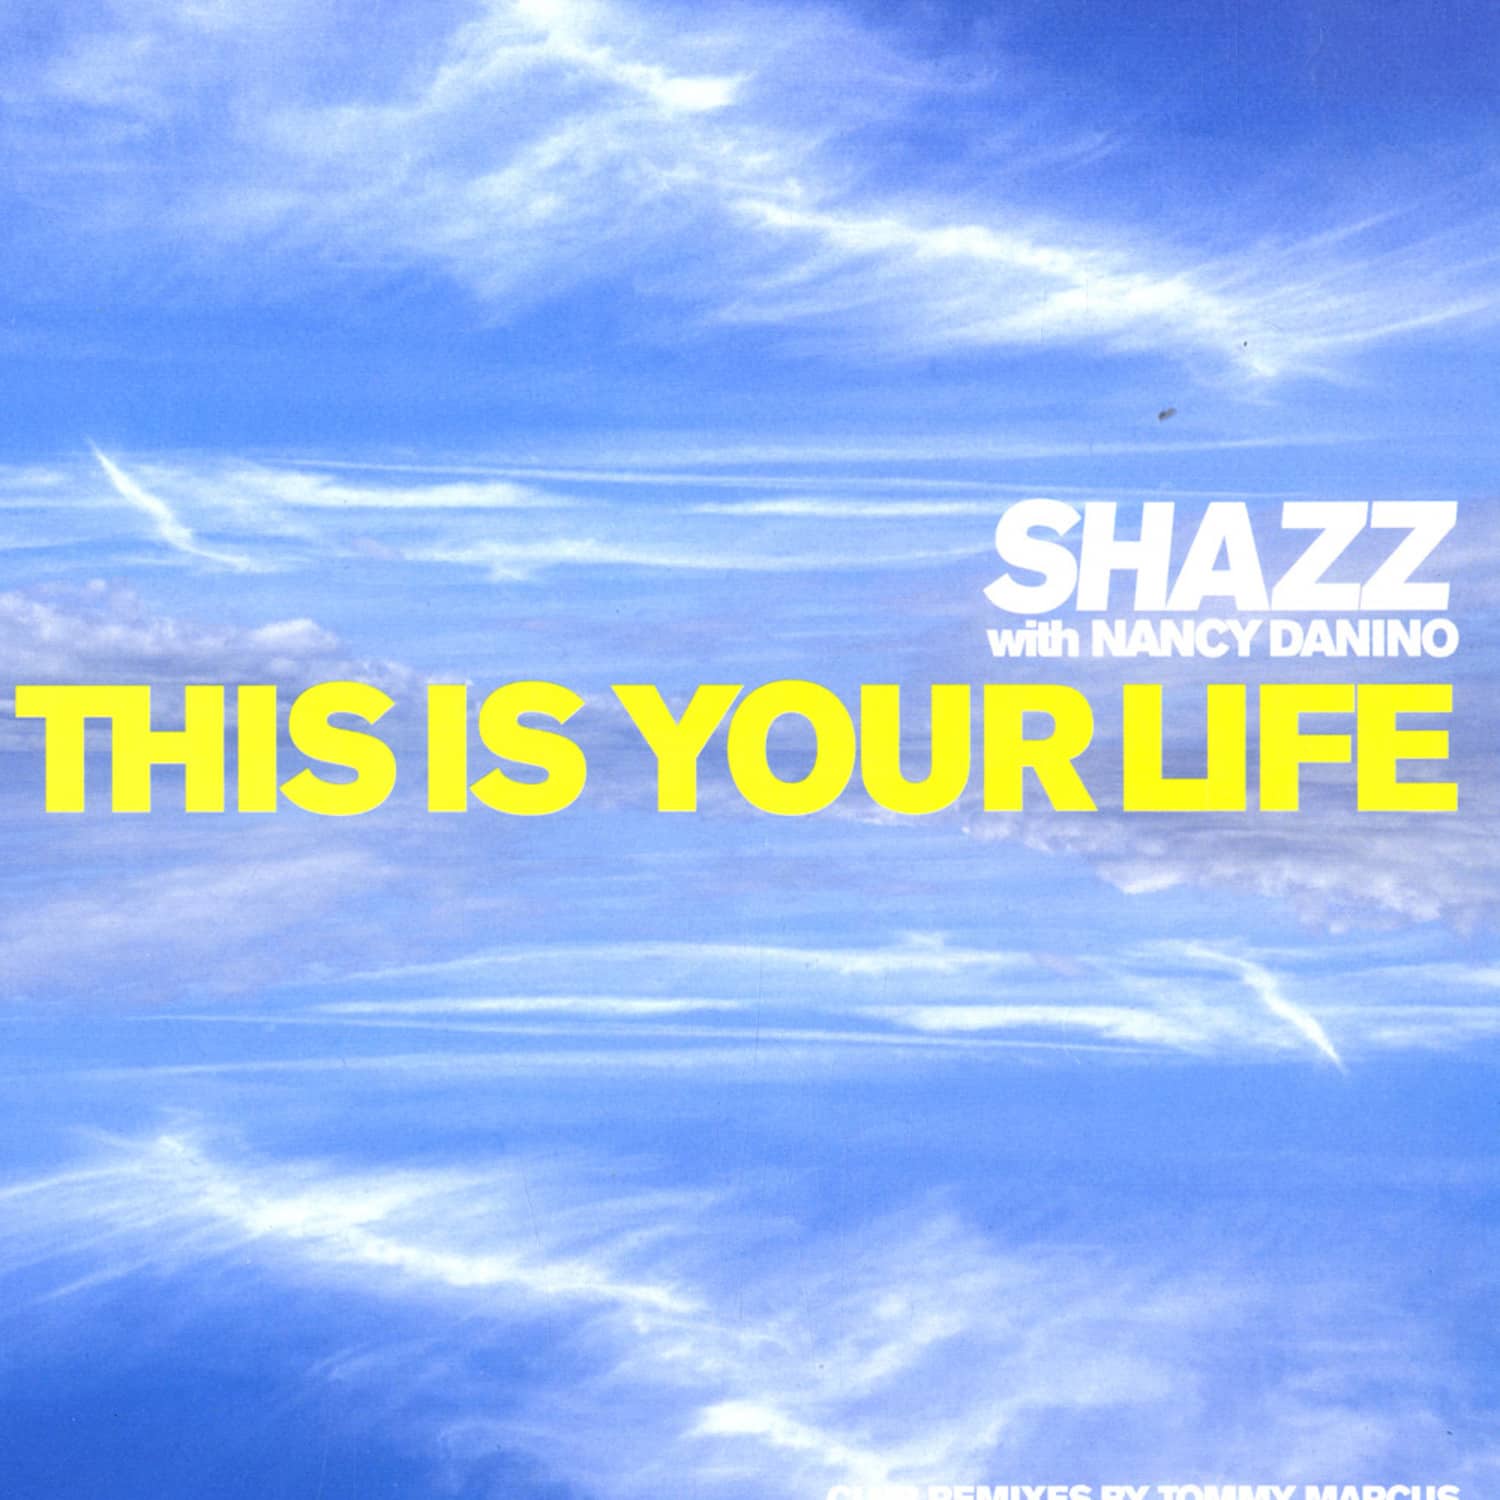 Shazz with Nancy Danino - THIS IS YOUR LIFE